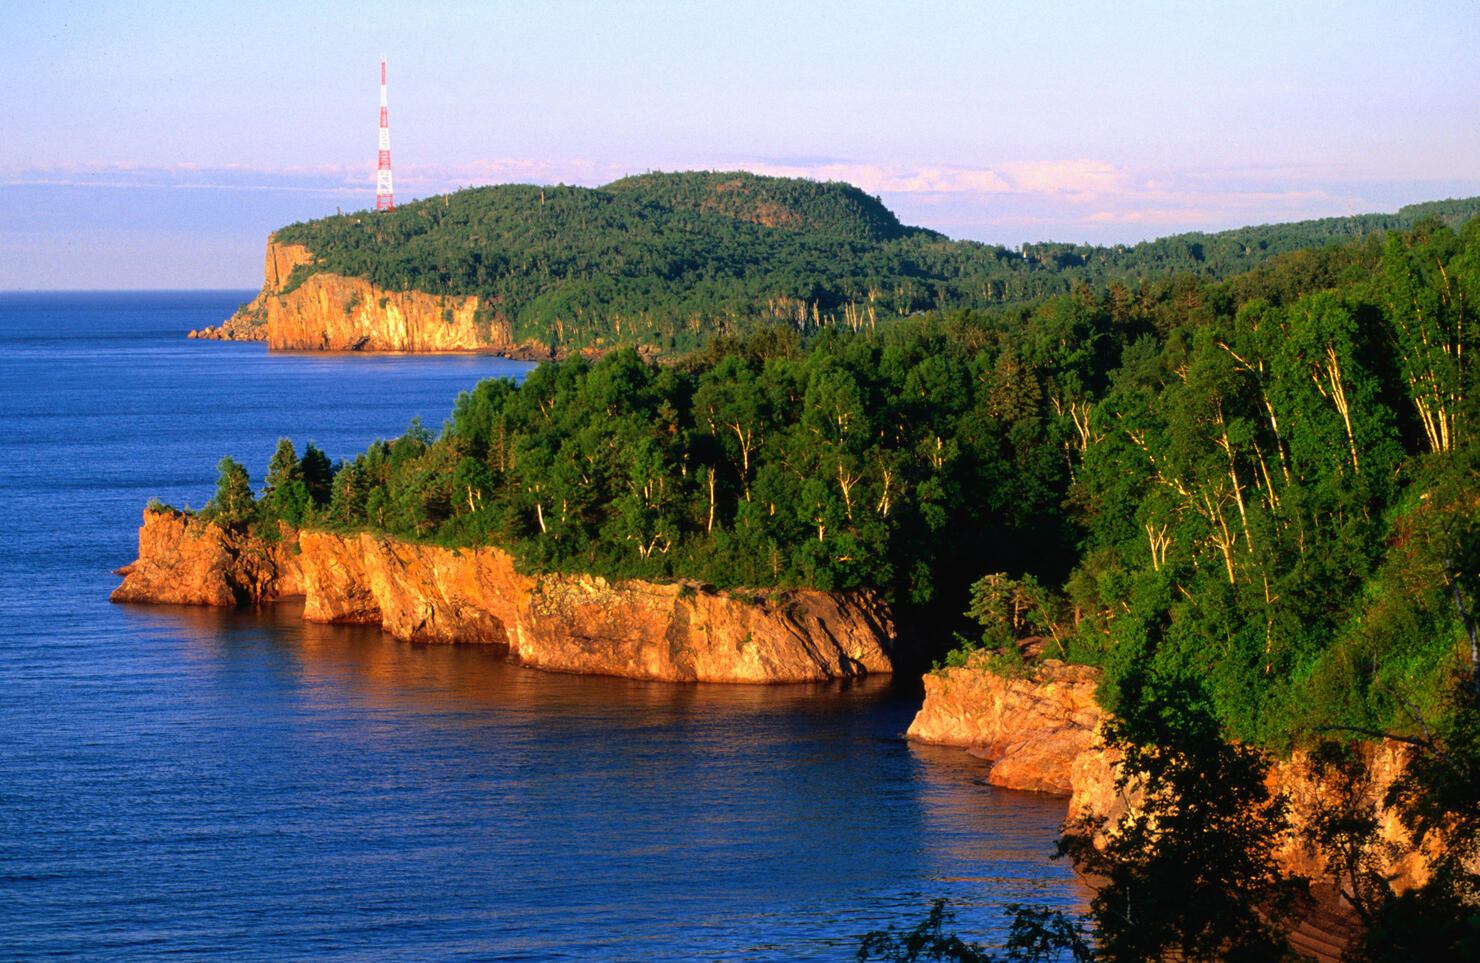 Lake Superior and Palisade Head in the Tettgouche State Park